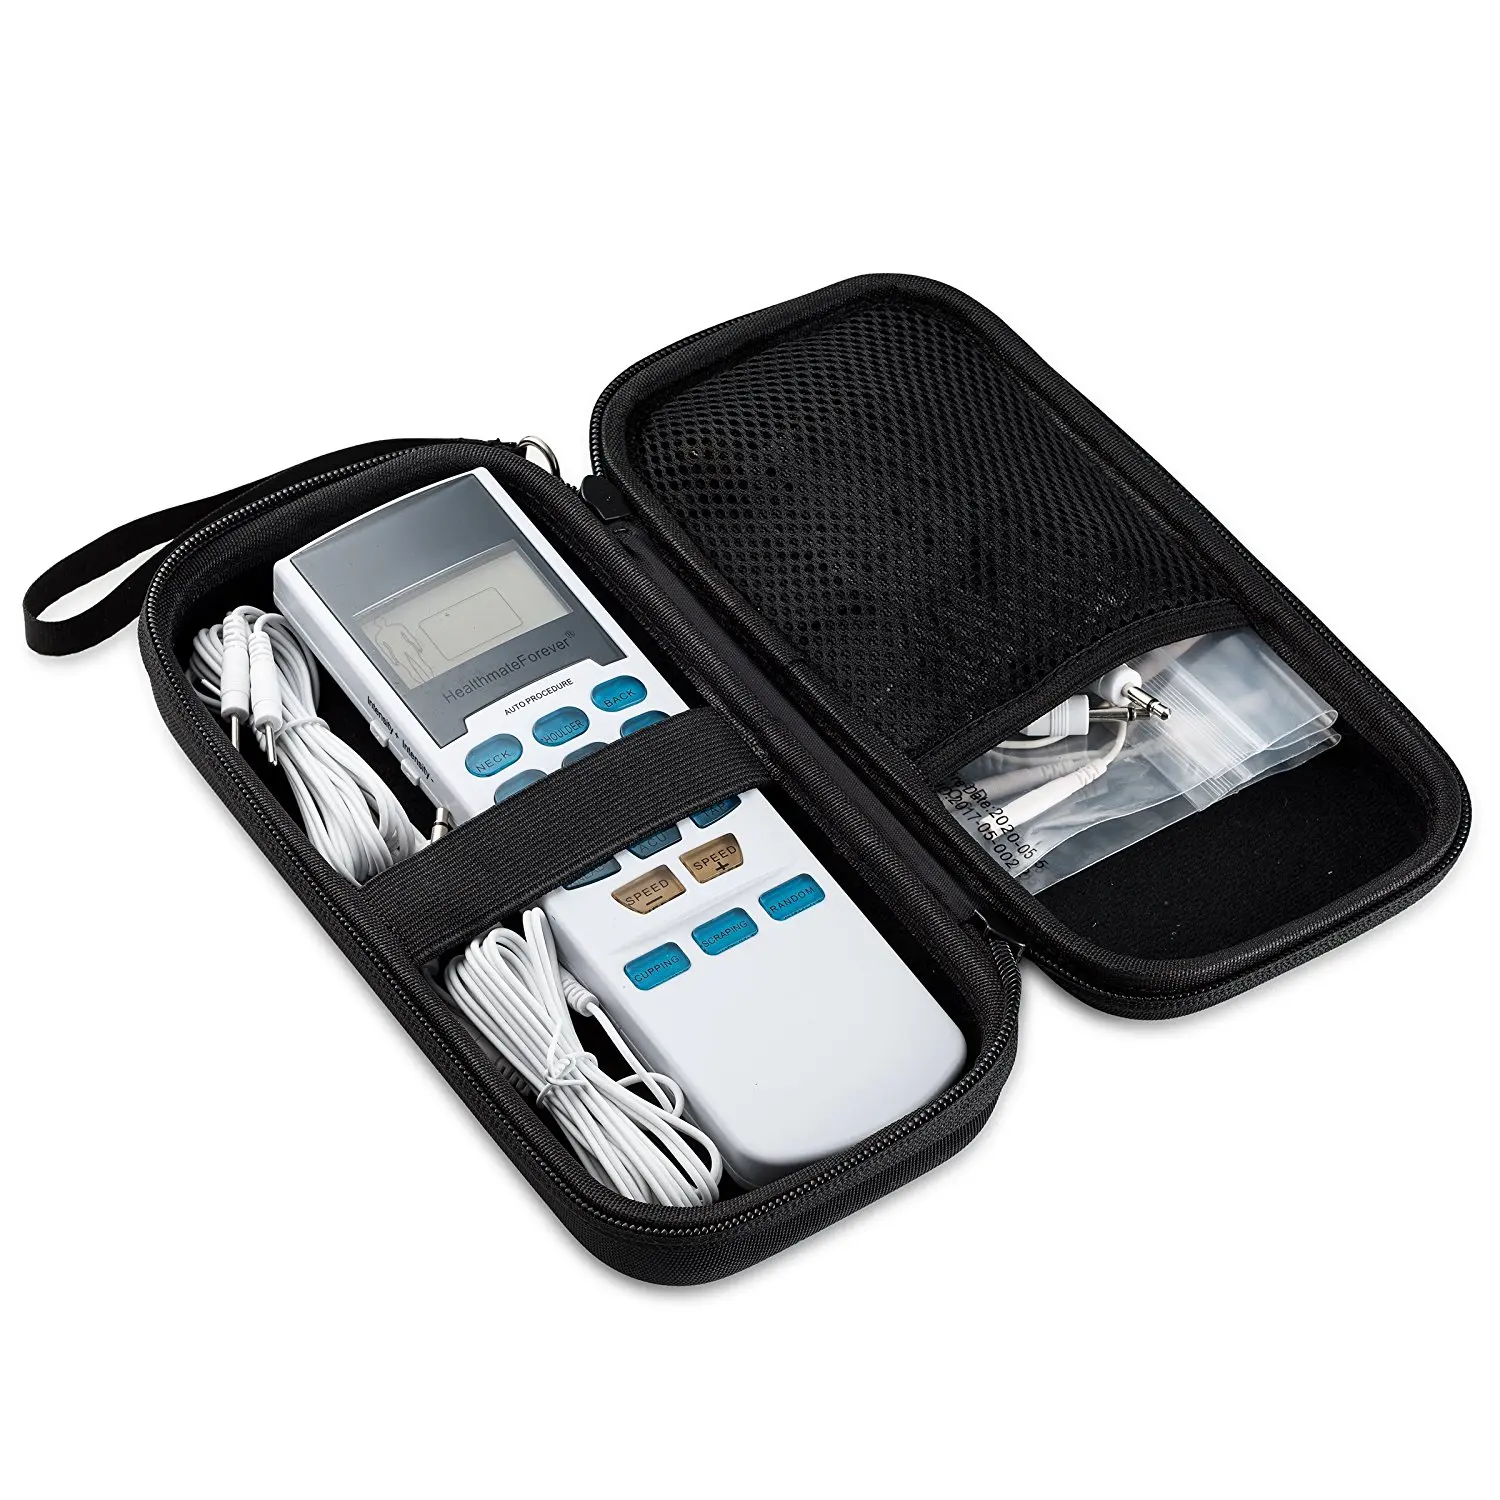 CASE Fits HealthmateForever YK15AB TENS unit Electronic Pulse By Caseling